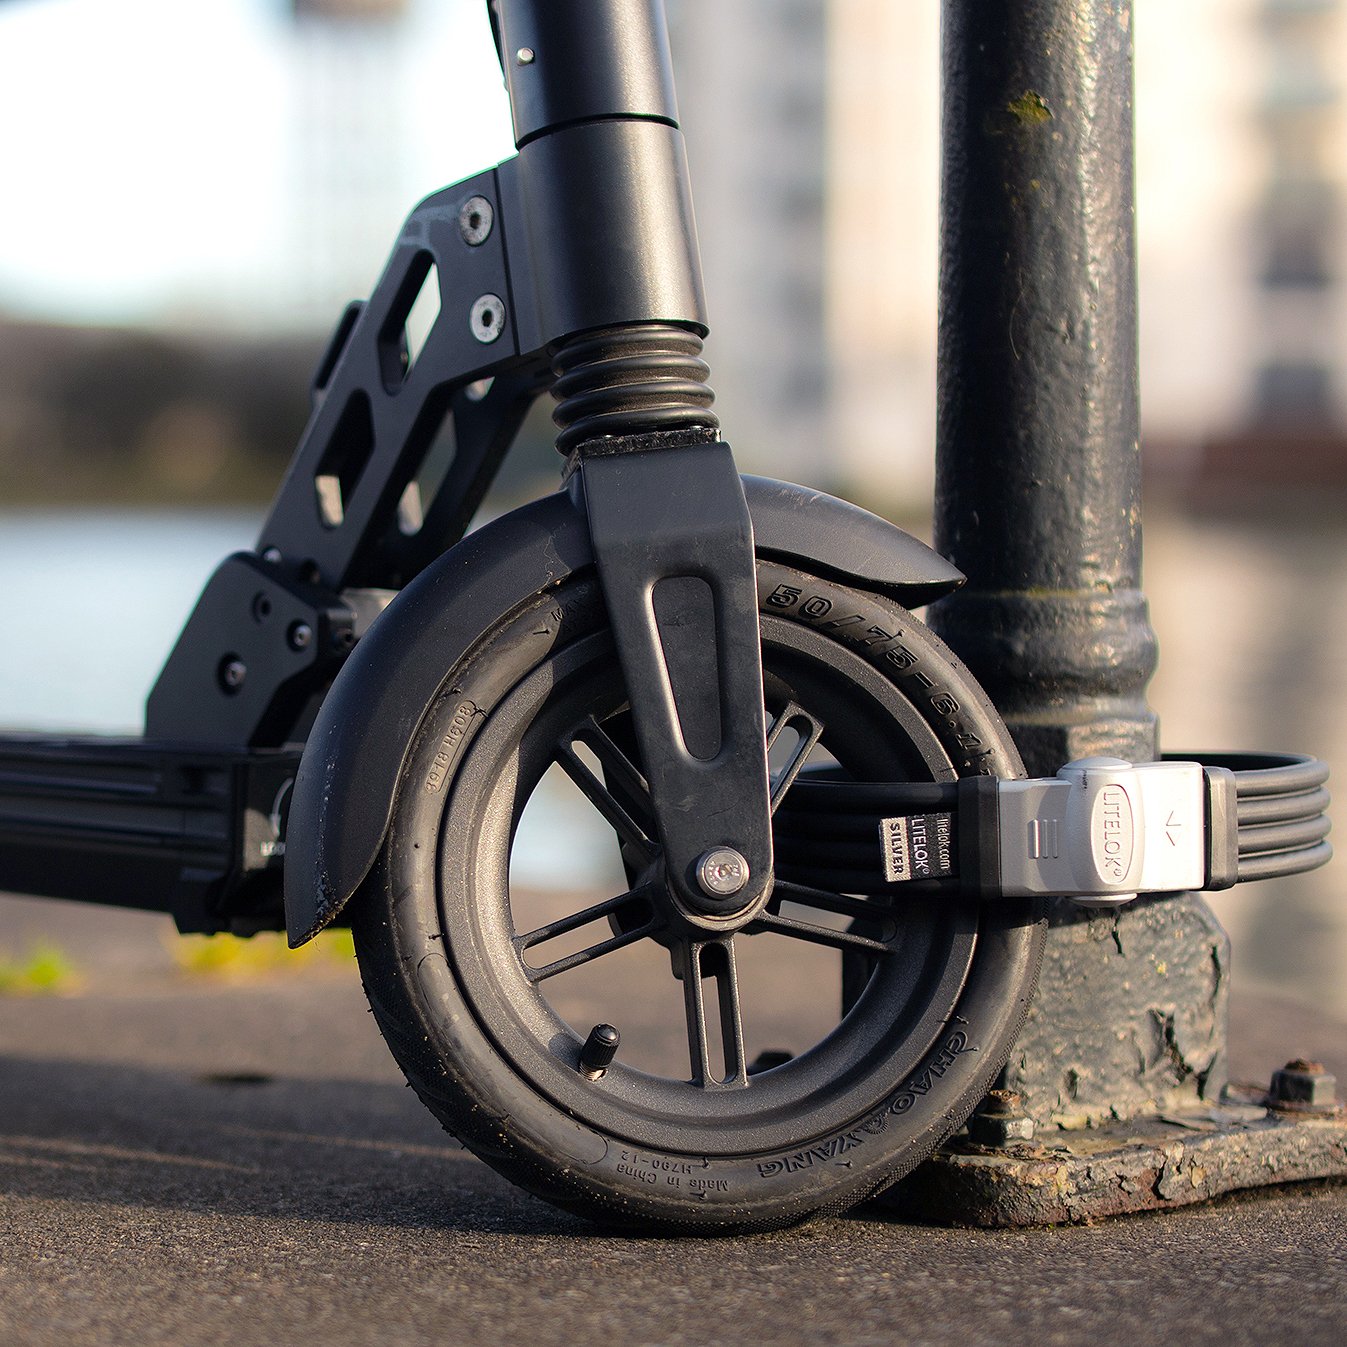 E-Scooter Locks - Electronic Scooter Locks